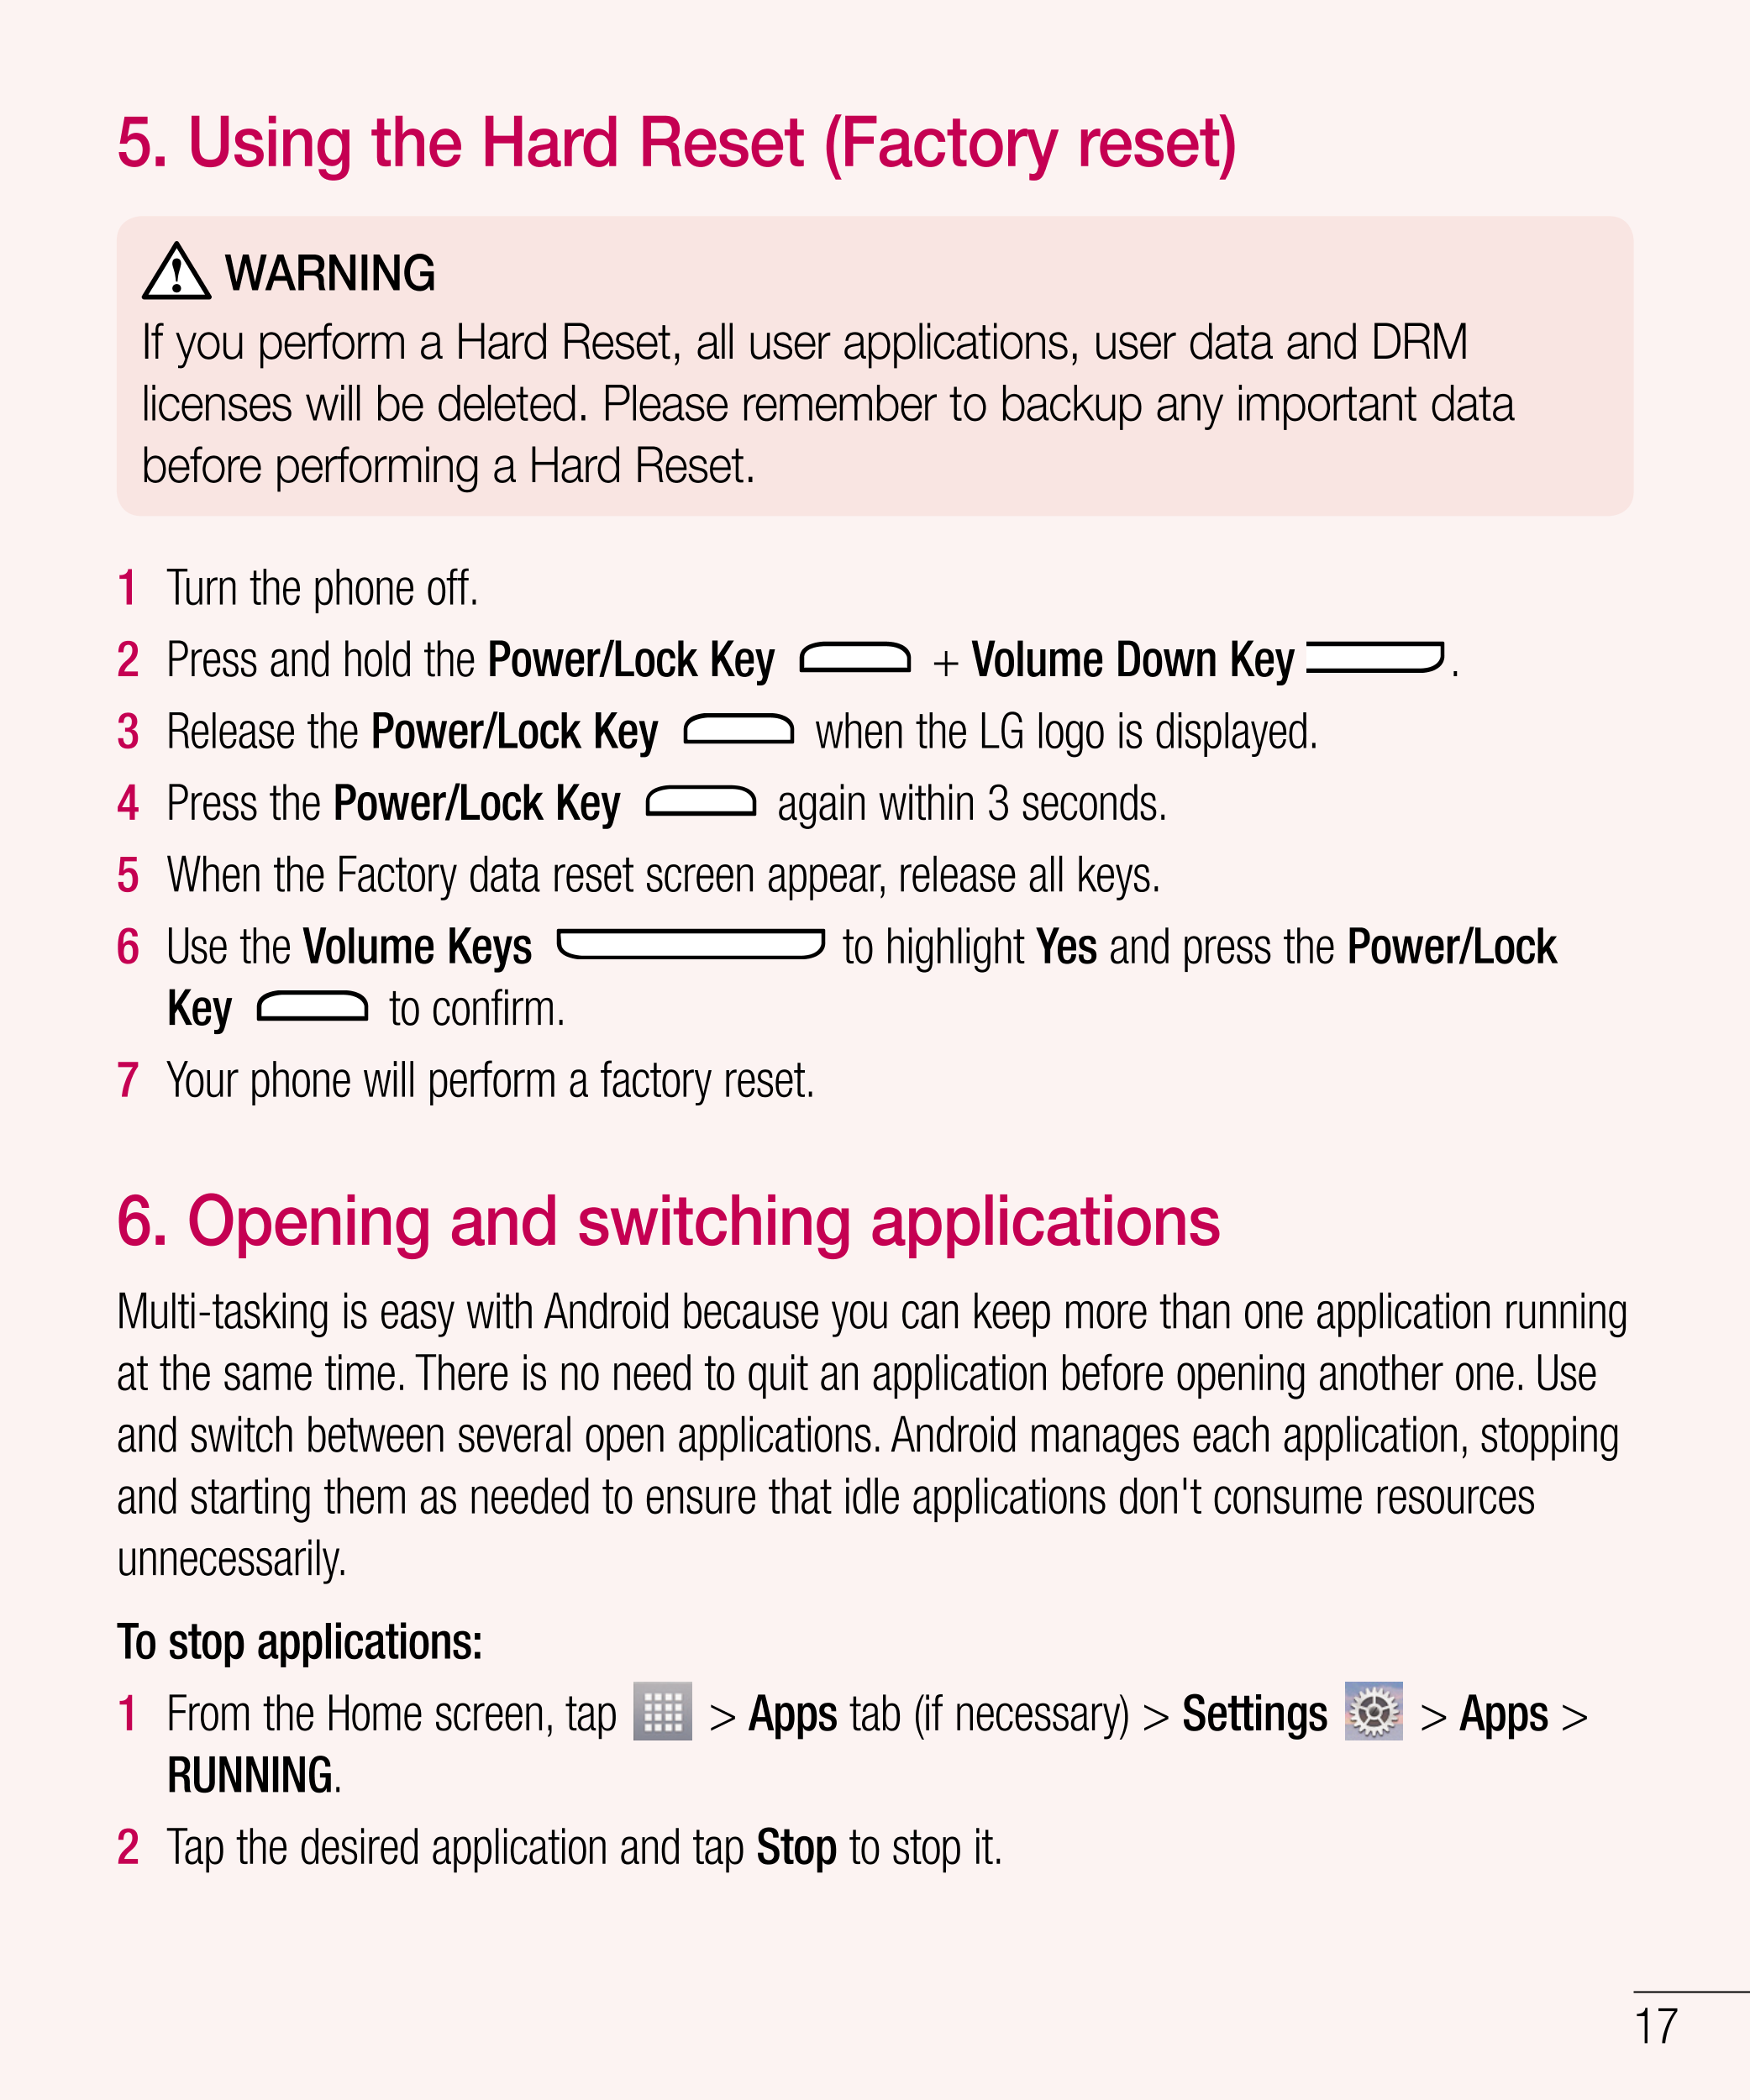 5.   Using the Hard Reset (Factory reset) 
WARNING
If you perform a Hard Reset, all user applications, user data and DRM 
licens